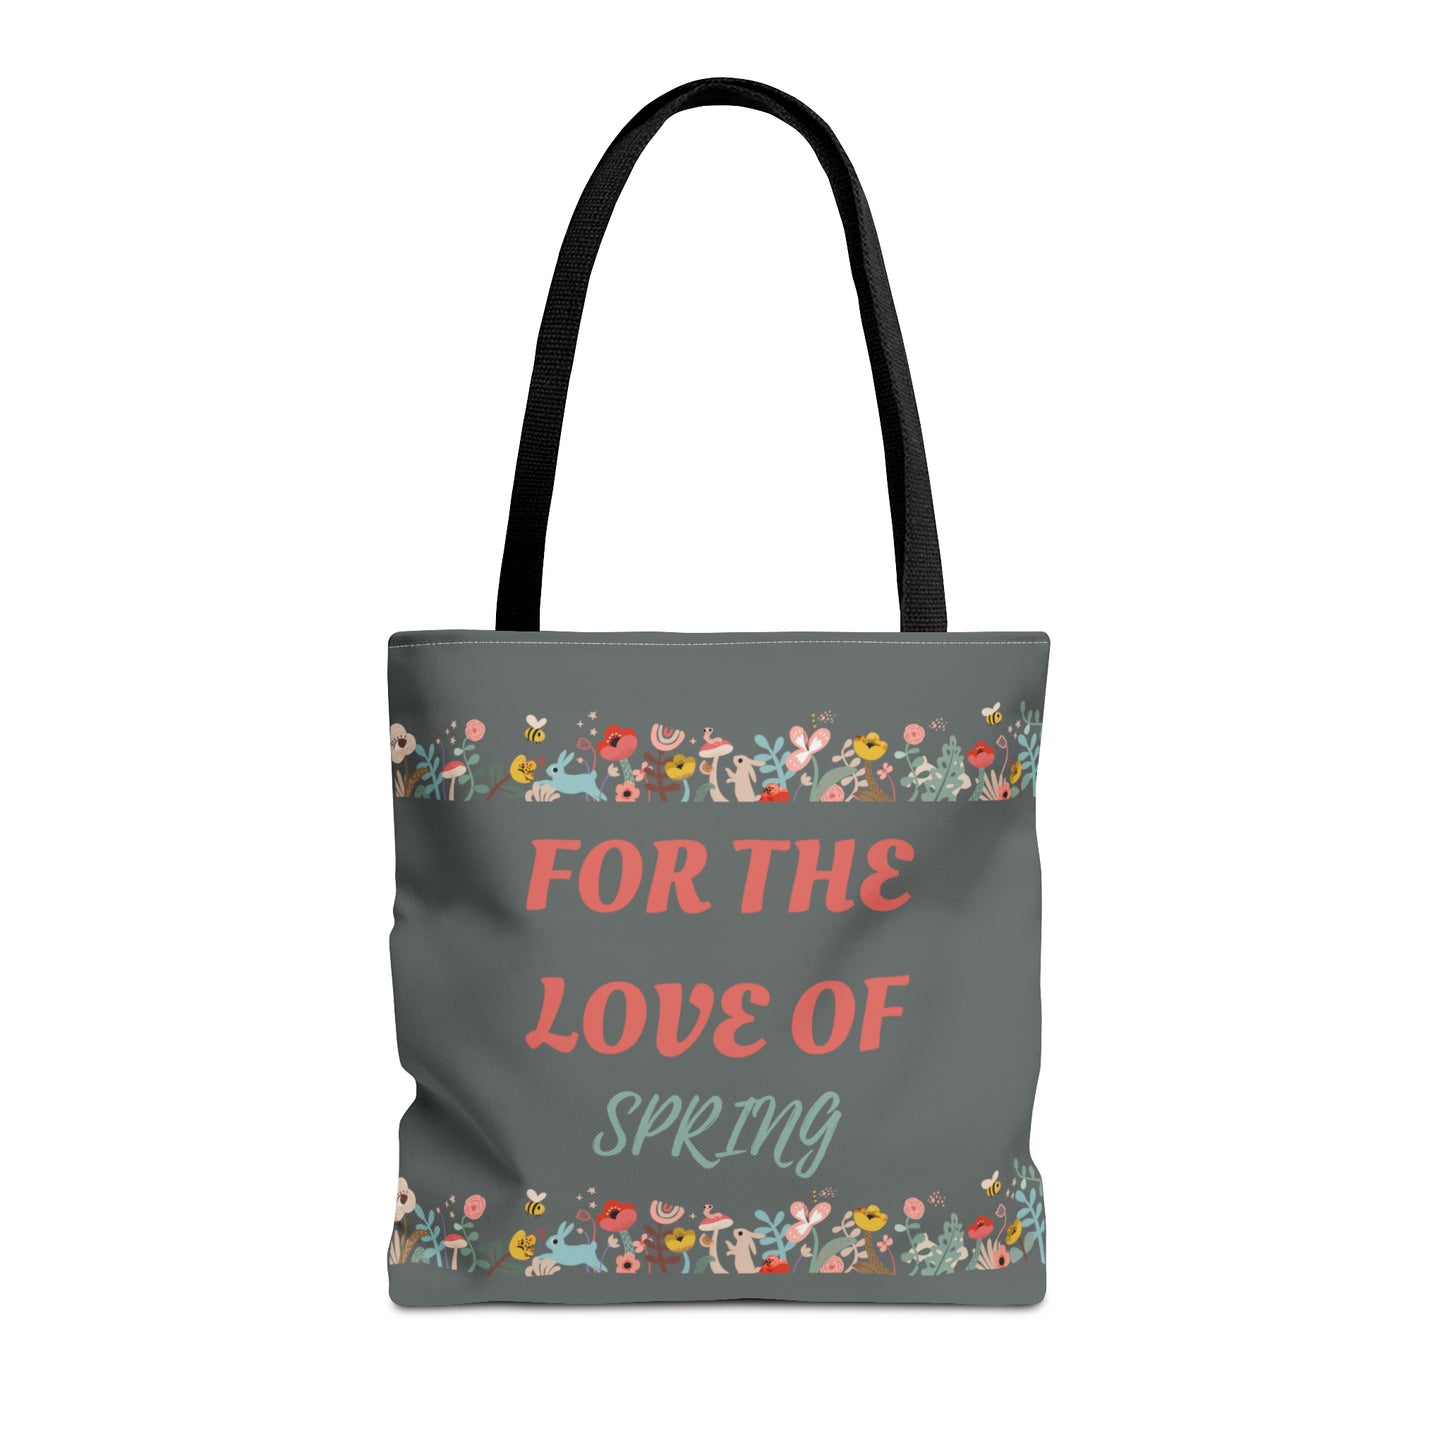 For The Love of Spring - Gray Tote Bag (AOP)